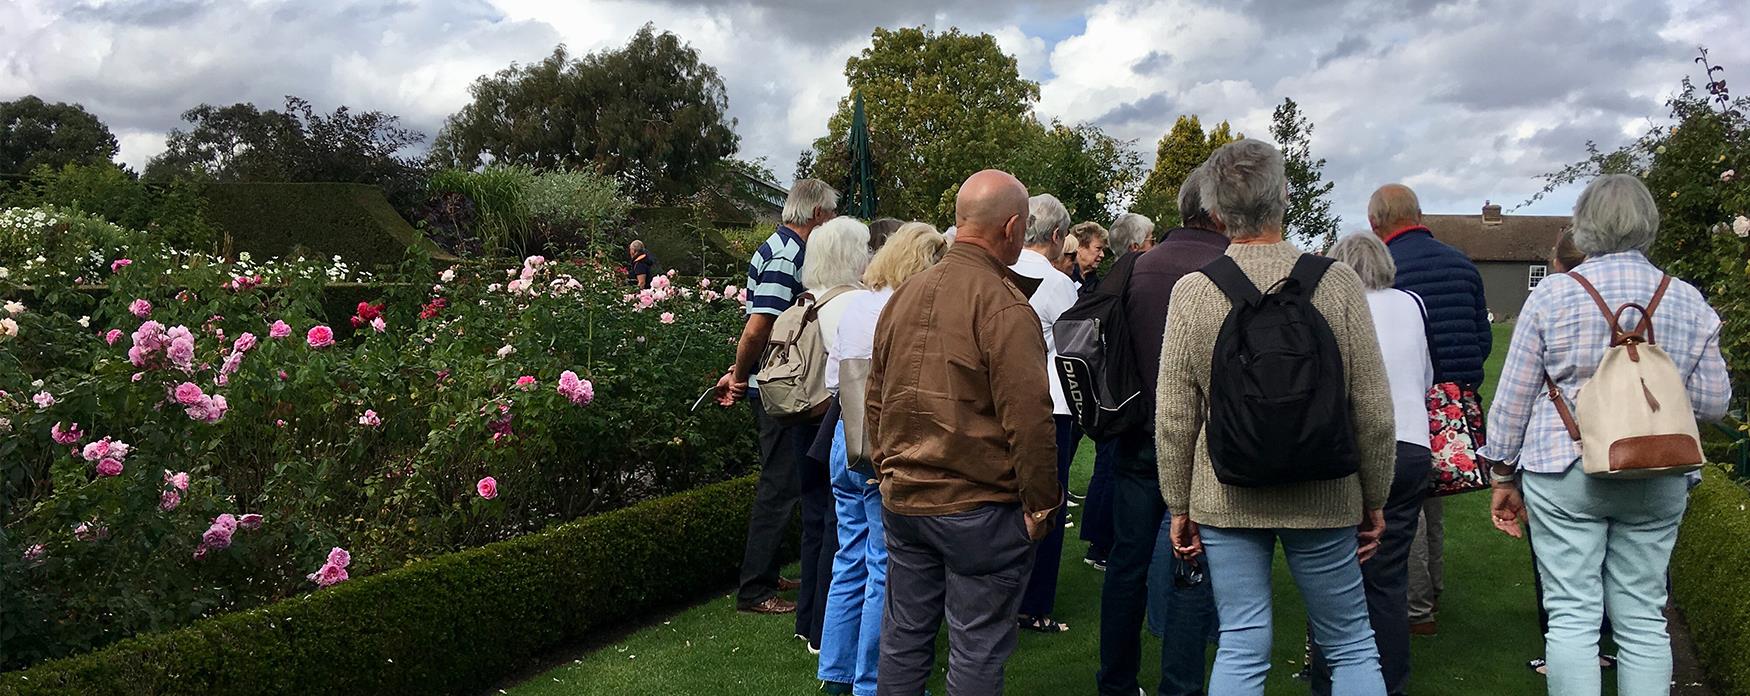 A group admiring the gardens at RHS Hyde Hall